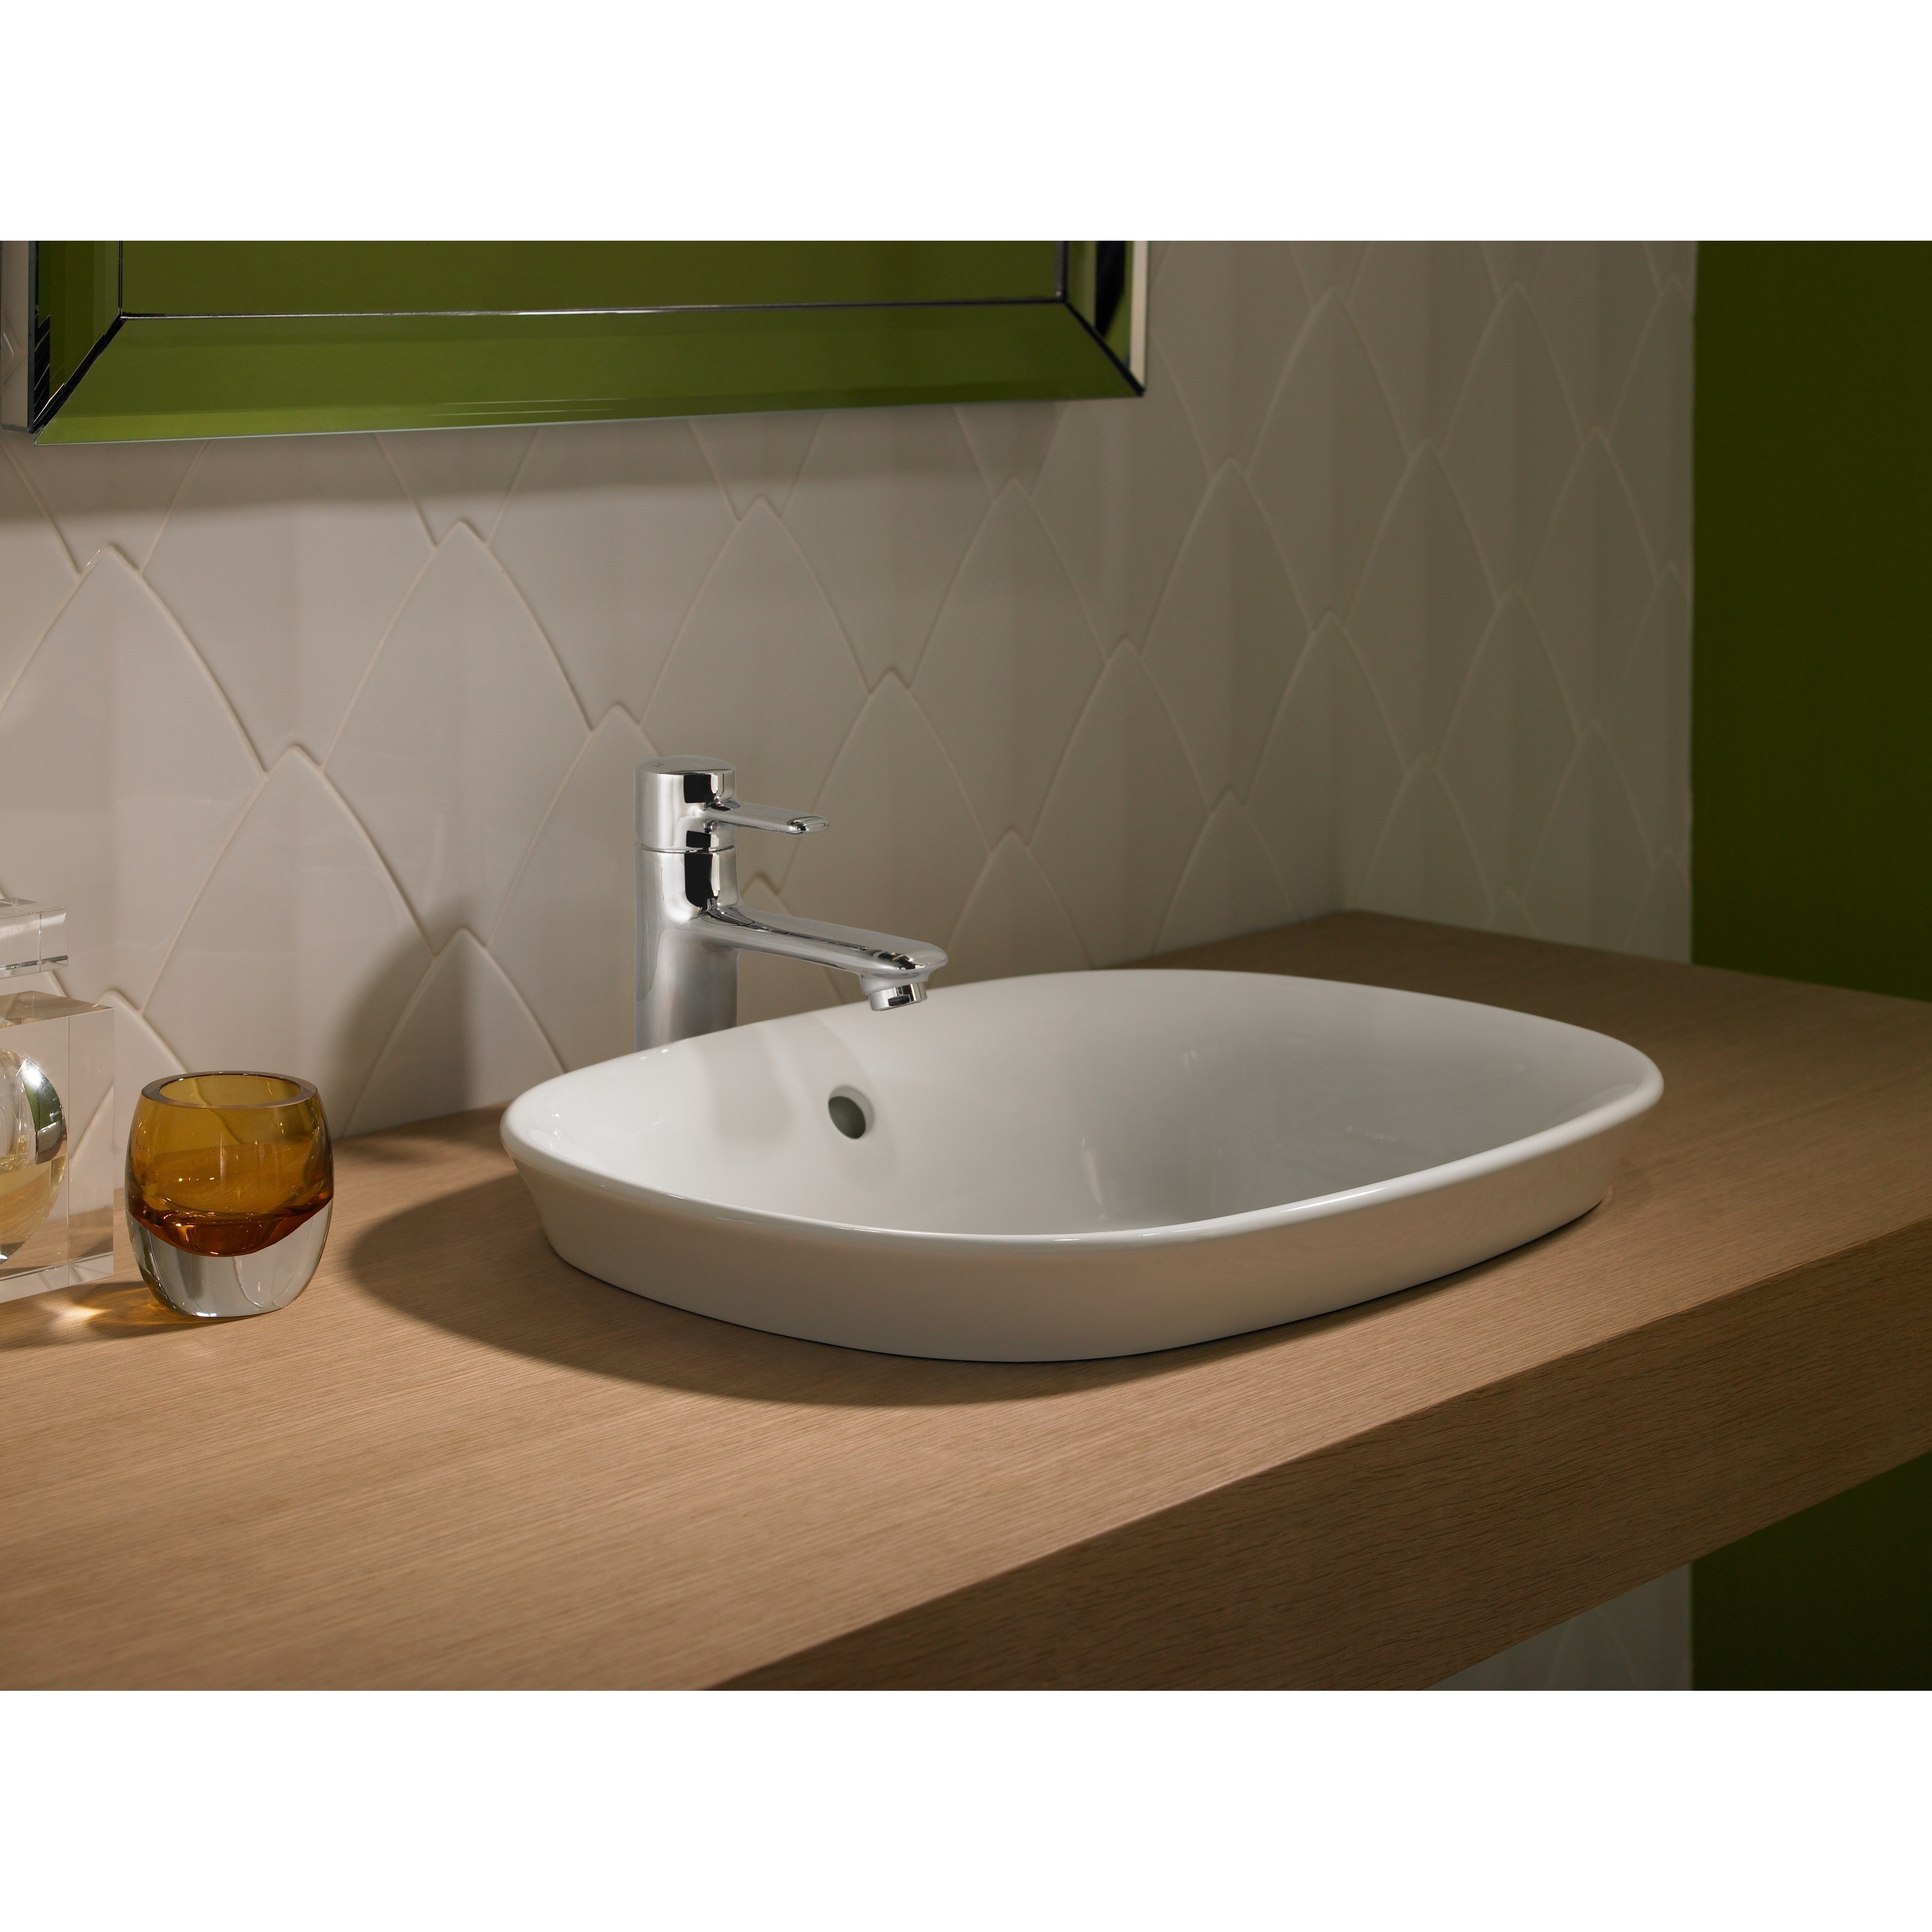 Toto Maris Oval Semi Recessed Vessel Bathroom Sink With Cefiontect Cotton White Lt480g 01